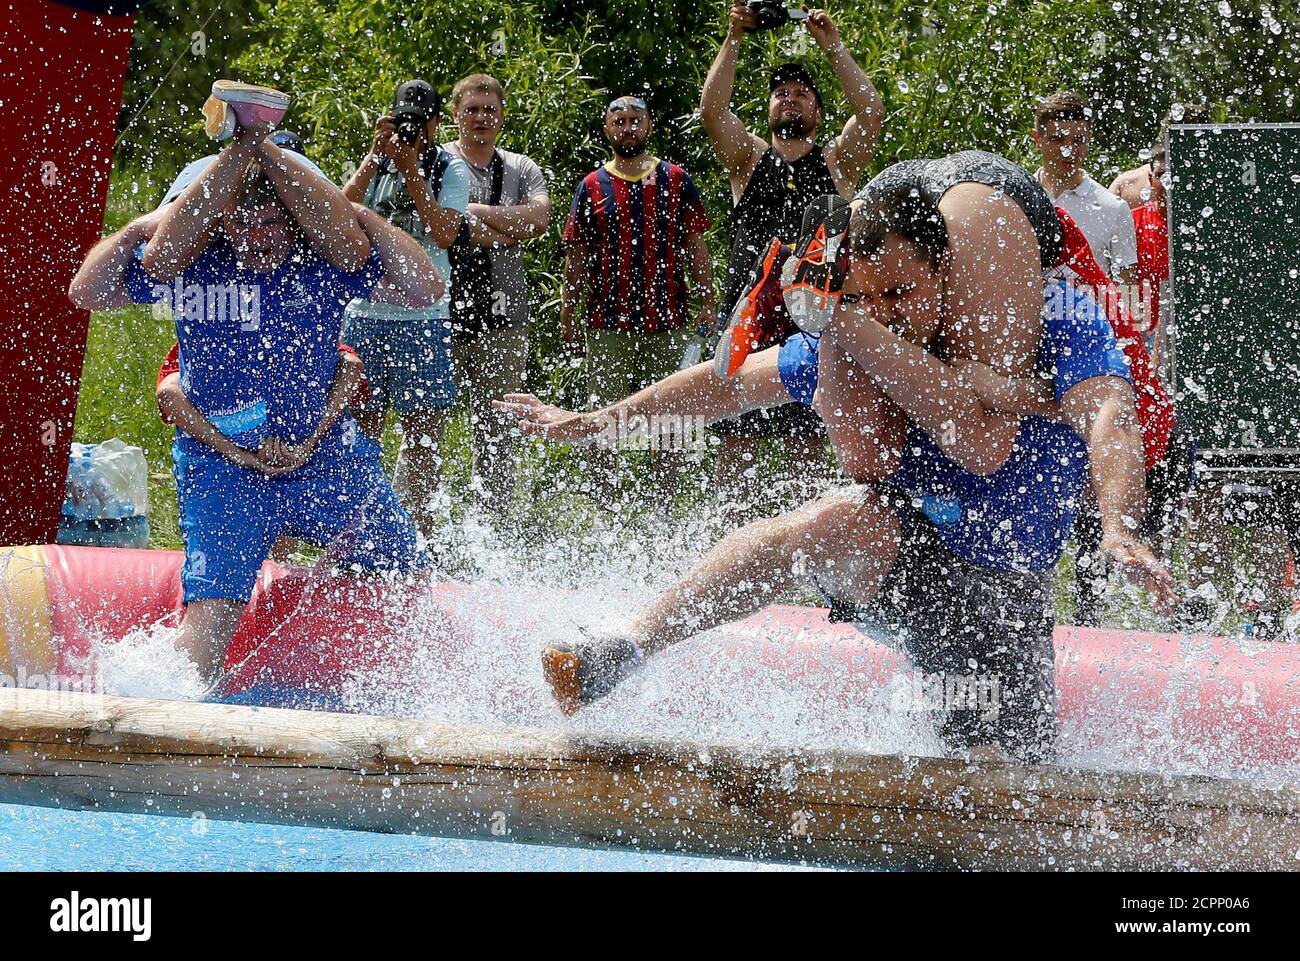 Men carry their wives over a water obstacle while racing in the Wife Carrying competititon to mark the City Day in Krasnoyarsk, Siberia, Russia, June 10, 2017. Picture taken June 10, 2017. REUTERS/Ilya Naymushin Stock Photo